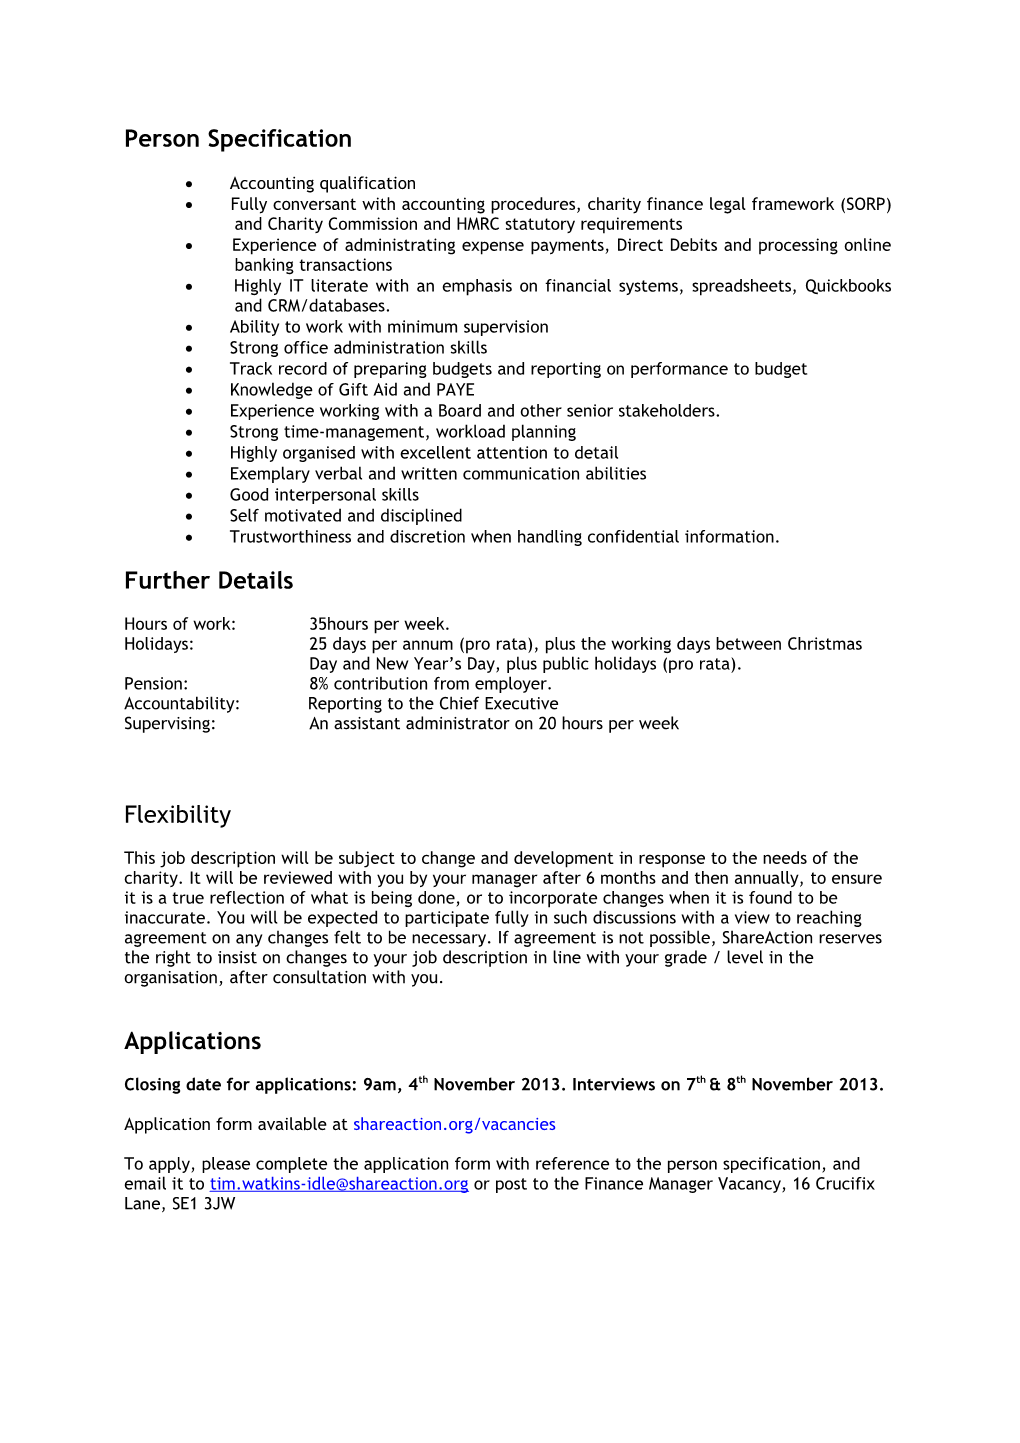 Type of Position: Full Time, 35 Hours with Flexible Working